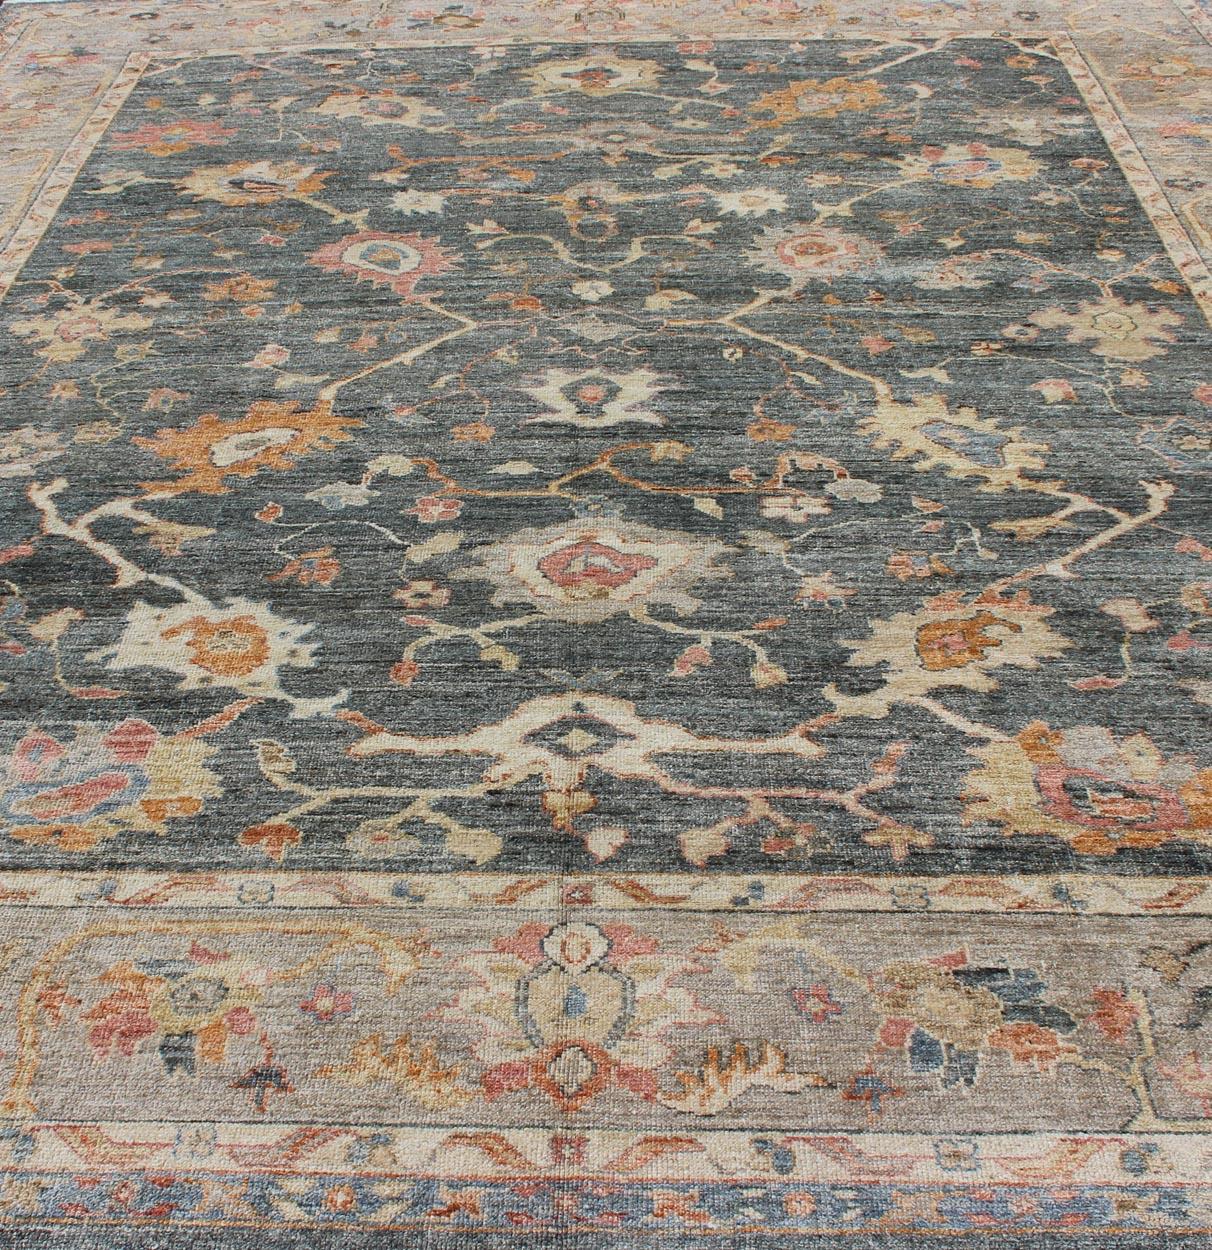 Wool Angora Turkish Oushak Rug in Dark Green, Silver Gray, Orange, and hints of Pink. For Sale